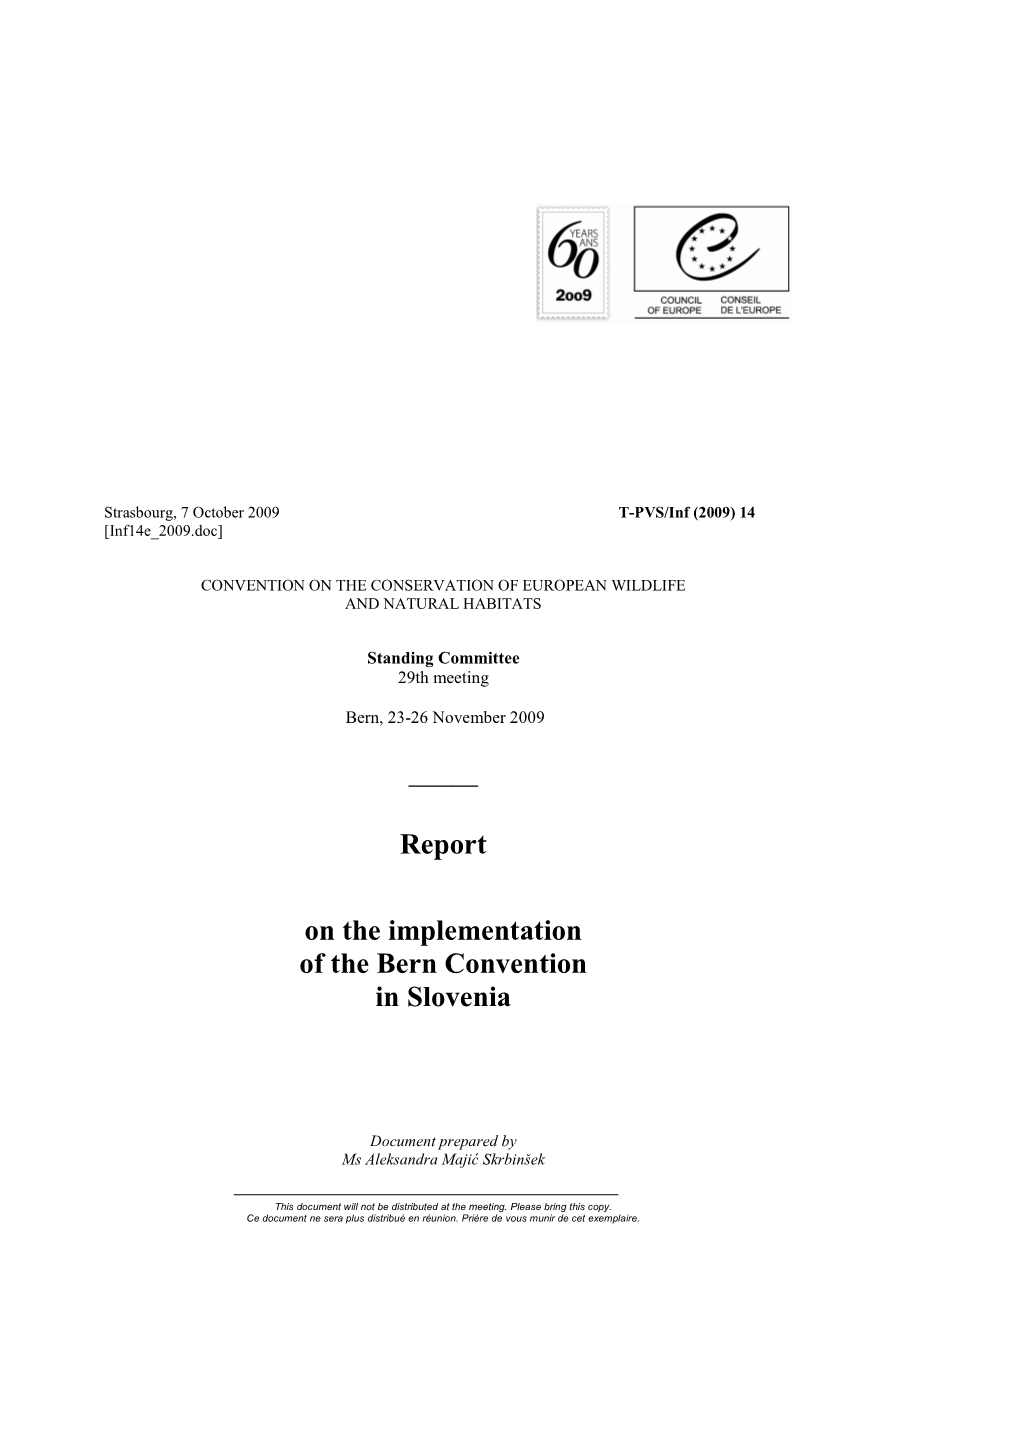 Report on the Implementation of the Bern Convention in Slovenia